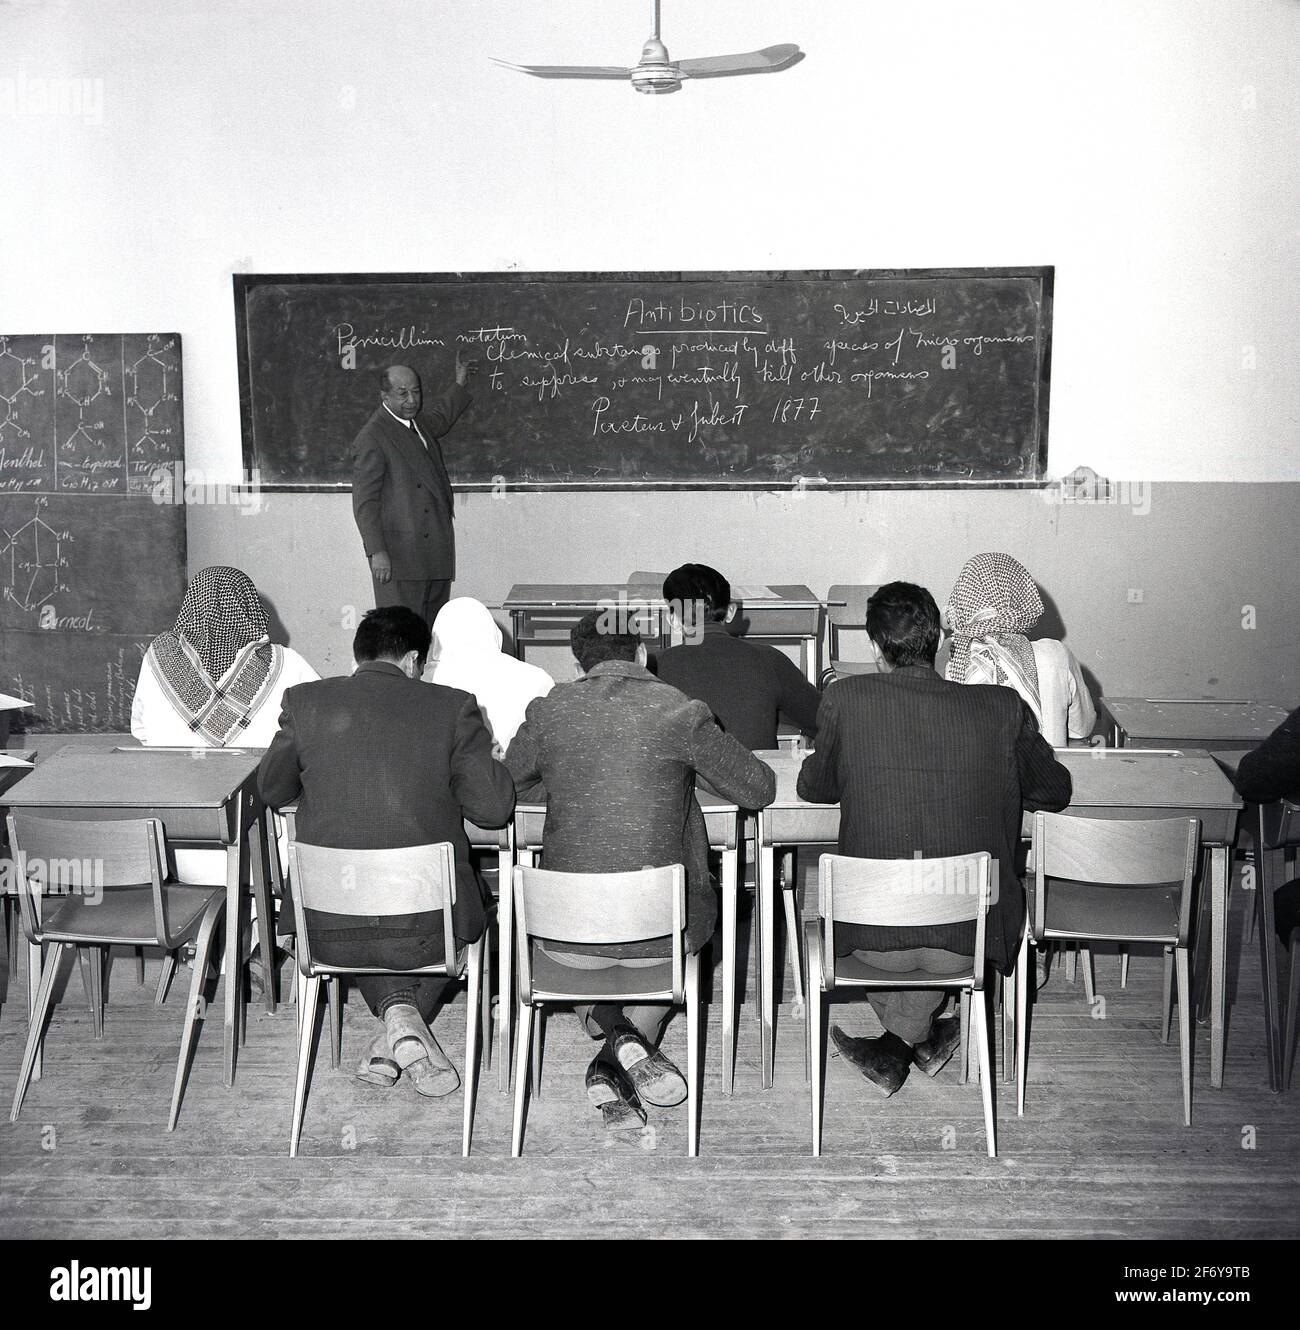 1960s, historical, arab male students, some wearing head scarfs, sitting in a classroom with a male teacher at the blackboard, Jeddah, Saudi Arabia. Interestingly the lesson appears to be in English, as the writing on the blackboard about 'Antibiotics' is in the English language. Stock Photo